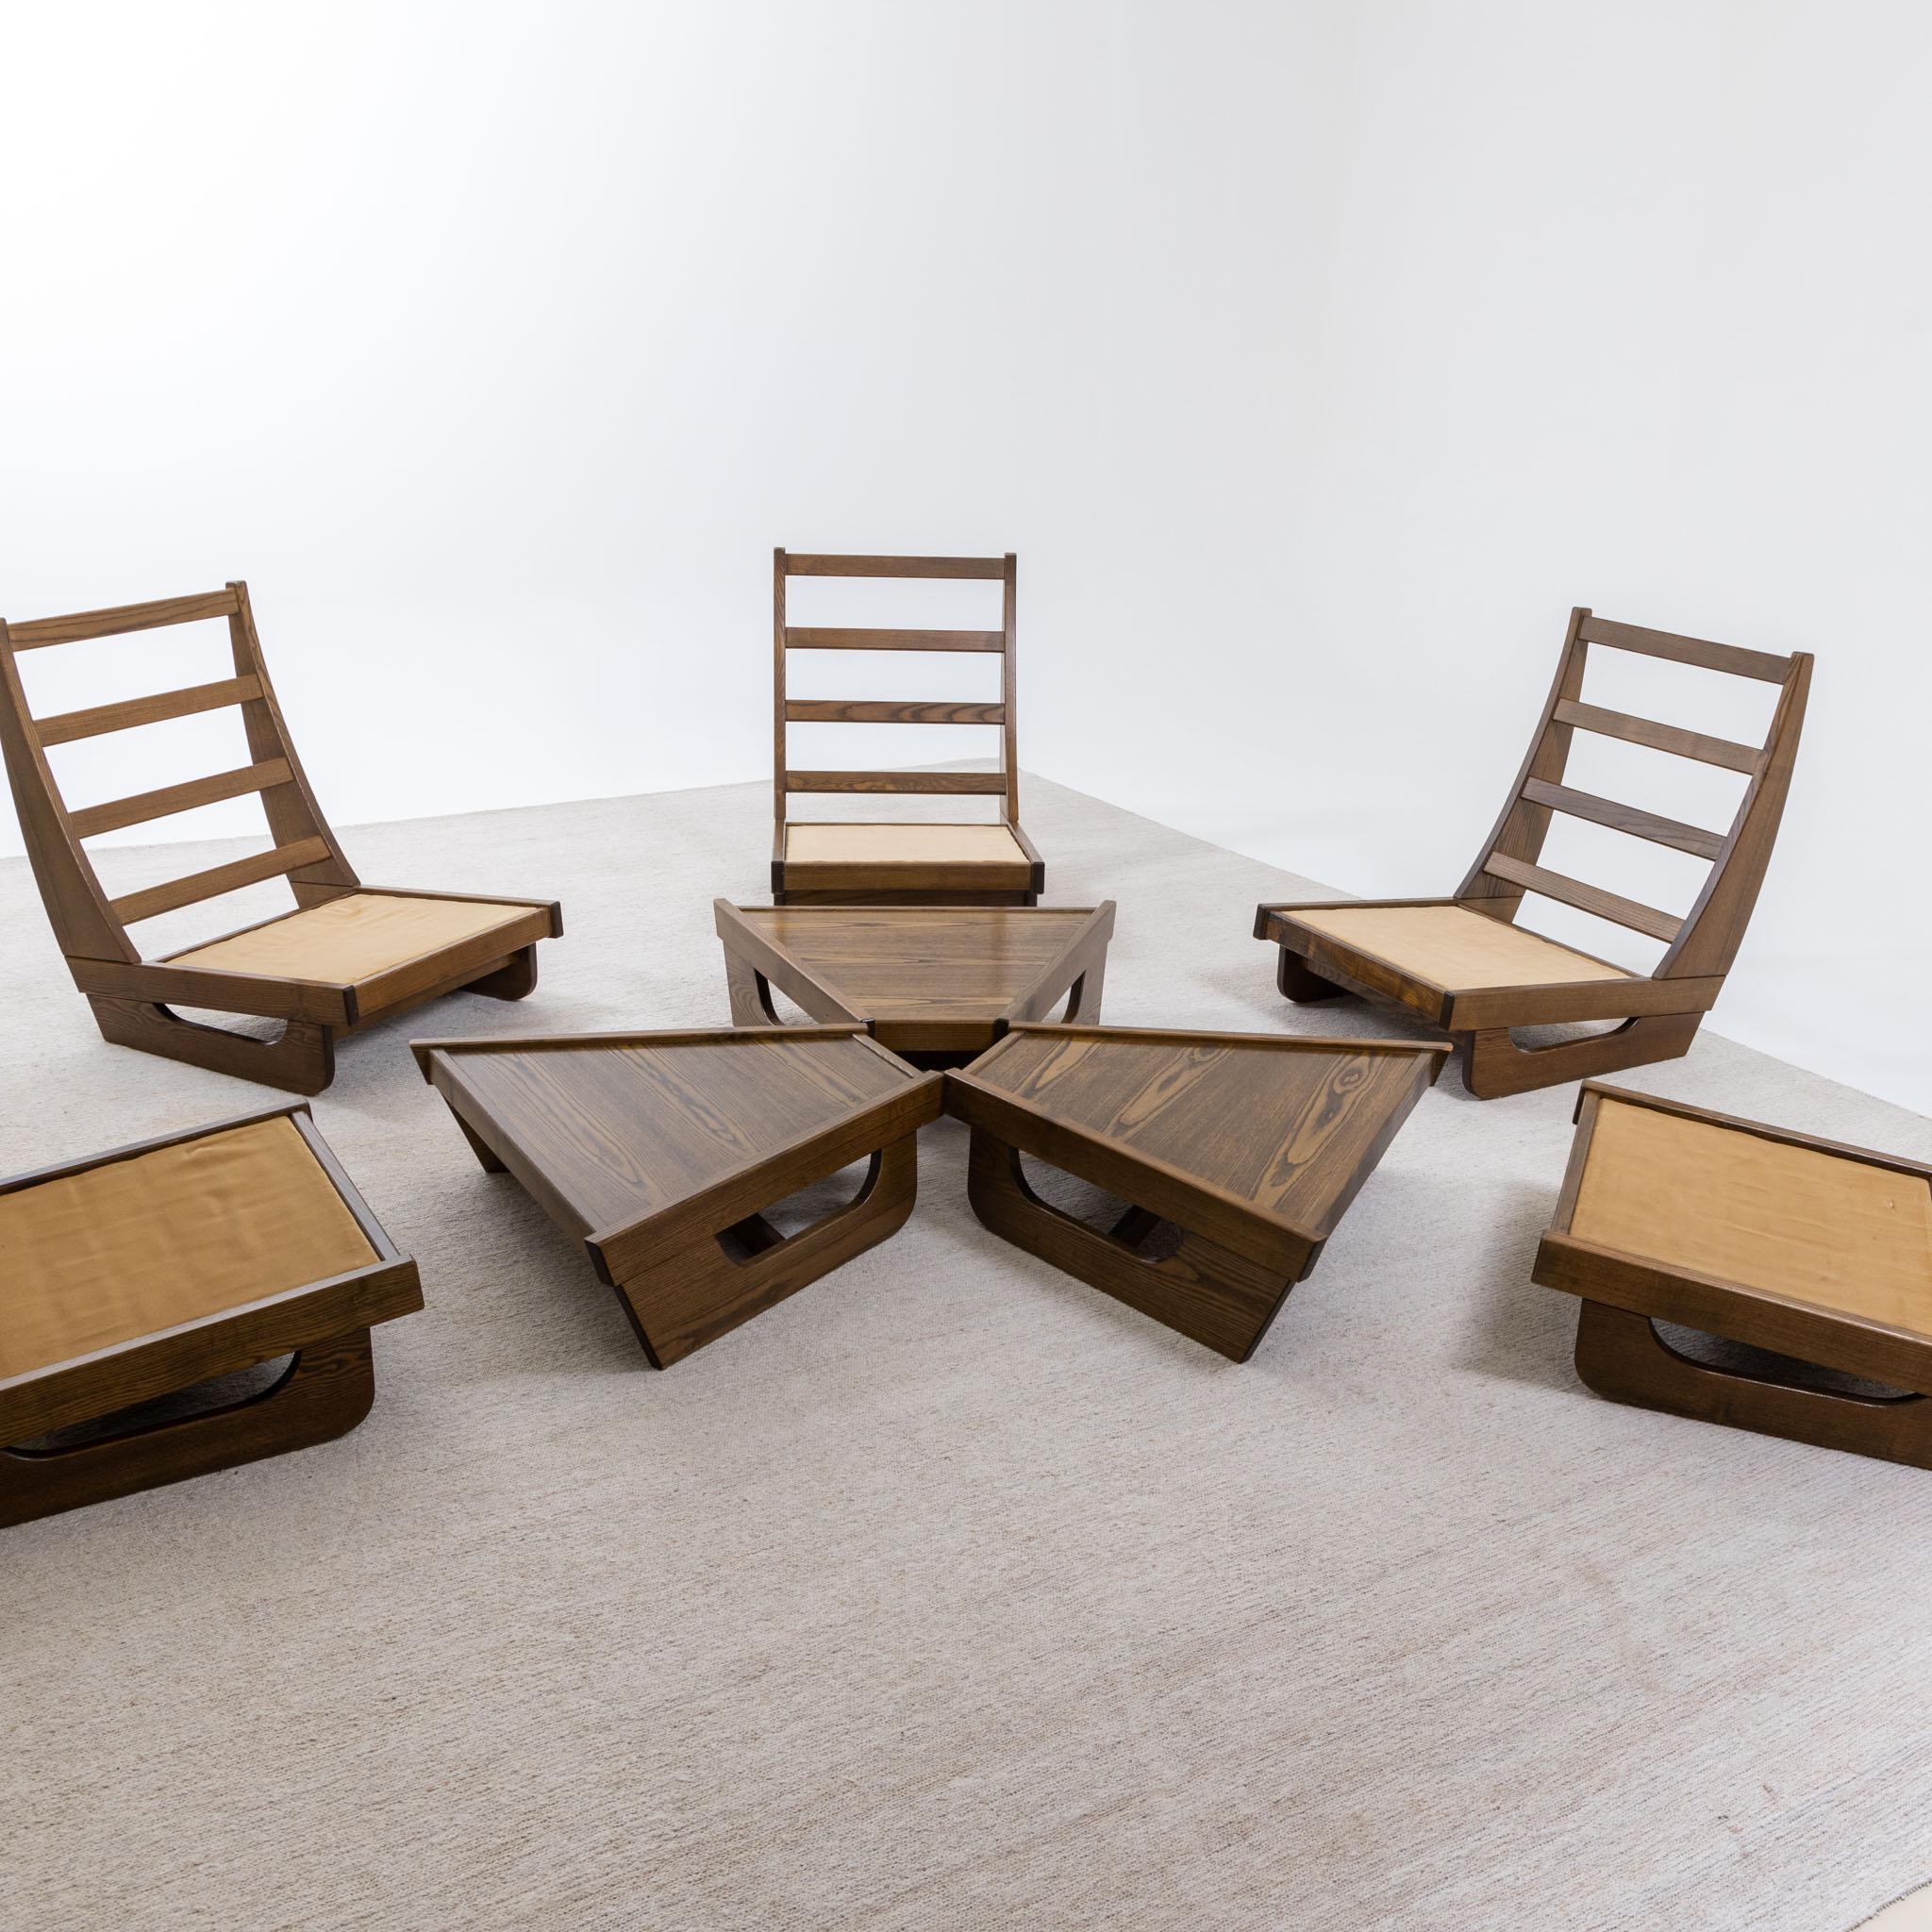 Modular Seating Group with five Lounge Chairs, Italy 1950s For Sale 7